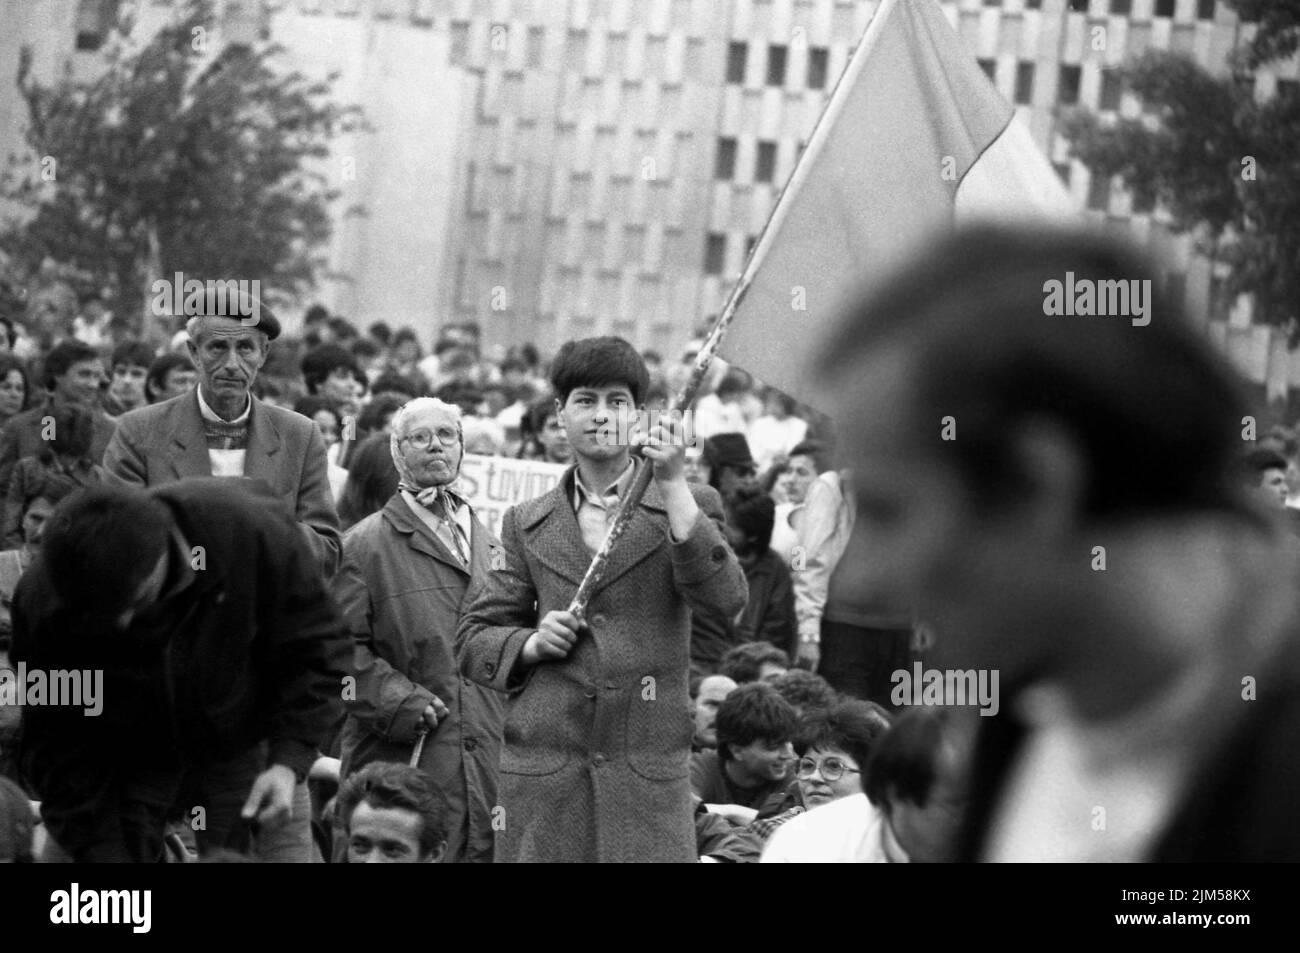 Bucharest, Romania, April 1990. 'Golaniada', a major anti-communism protest  in the University Square following the Romanian Revolution of 1989. People would gather daily to protest the ex-communists that took the power after the Revolution. The main demand was that no former party member would be allowed to run in the elections of May 20th. In this picture, a boy is waving the Romanian flag with the Socialist emblem cut off, an anti-communist symbol during the revolution. Stock Photo